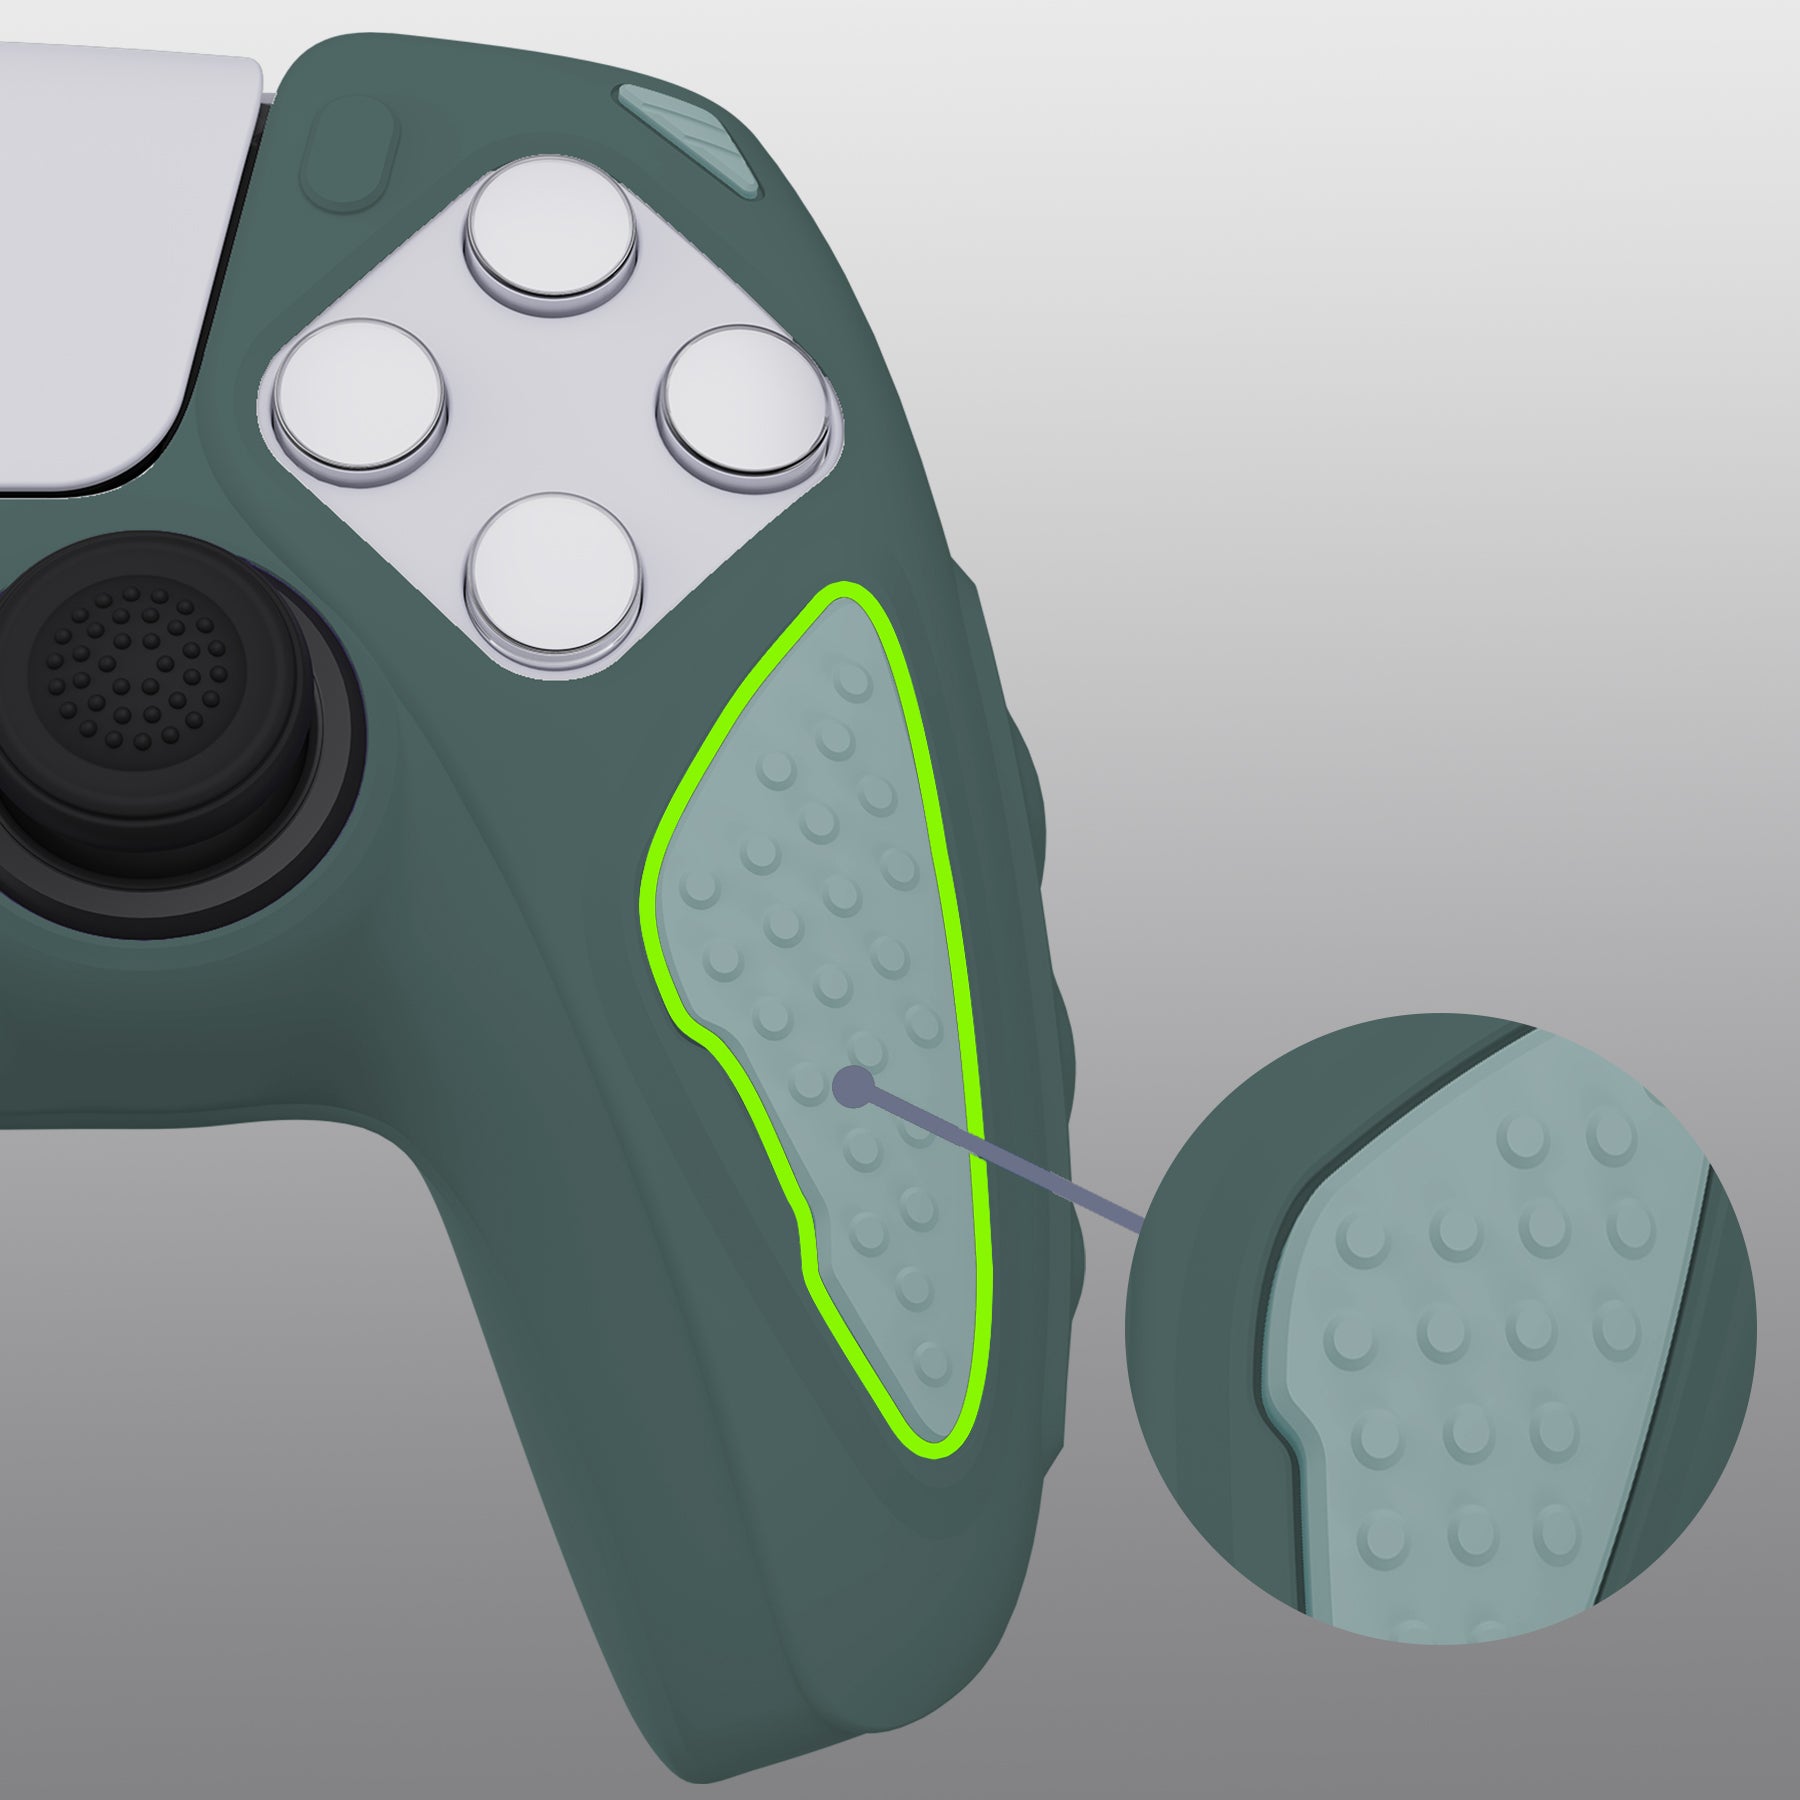 PlayVital Knight Edition Anti-Slip Silicone Cover Skin with Thumb Grip Caps for PS5 Wireless Controller - Templeton Gray & Jade Grey - QSPF012 PlayVital